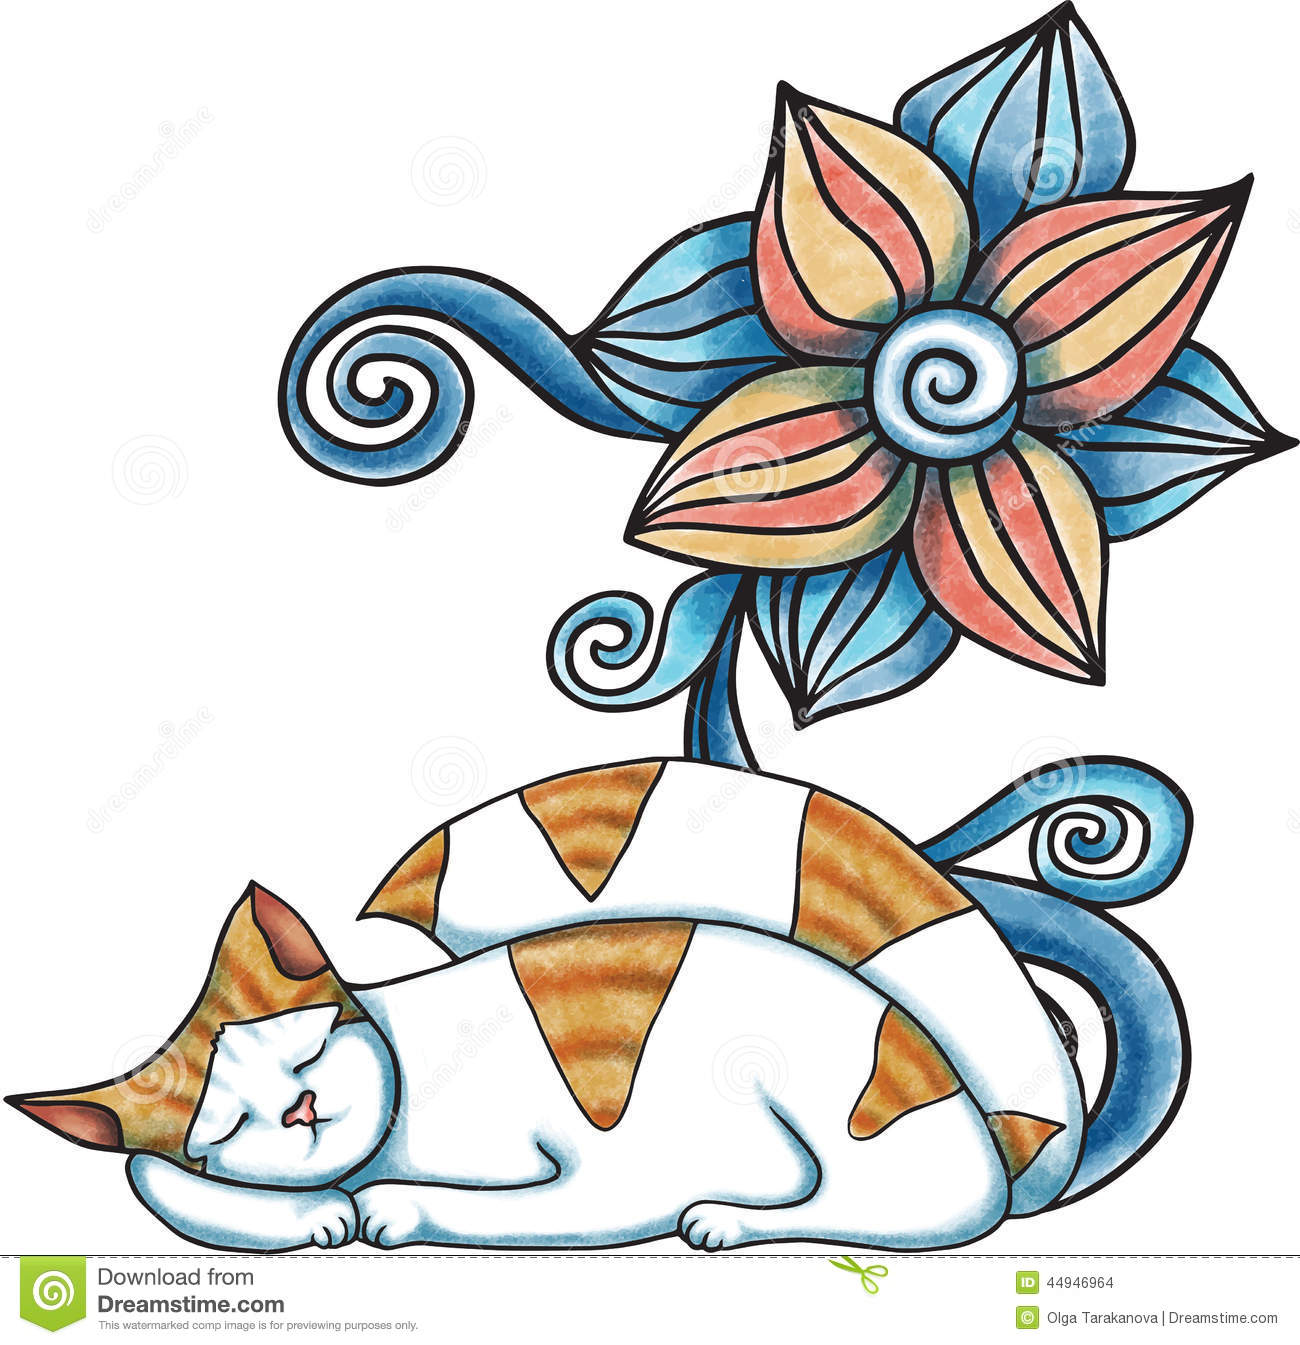 Cartoon Vector Illustration Of Sleping Cat And Decorative Flower